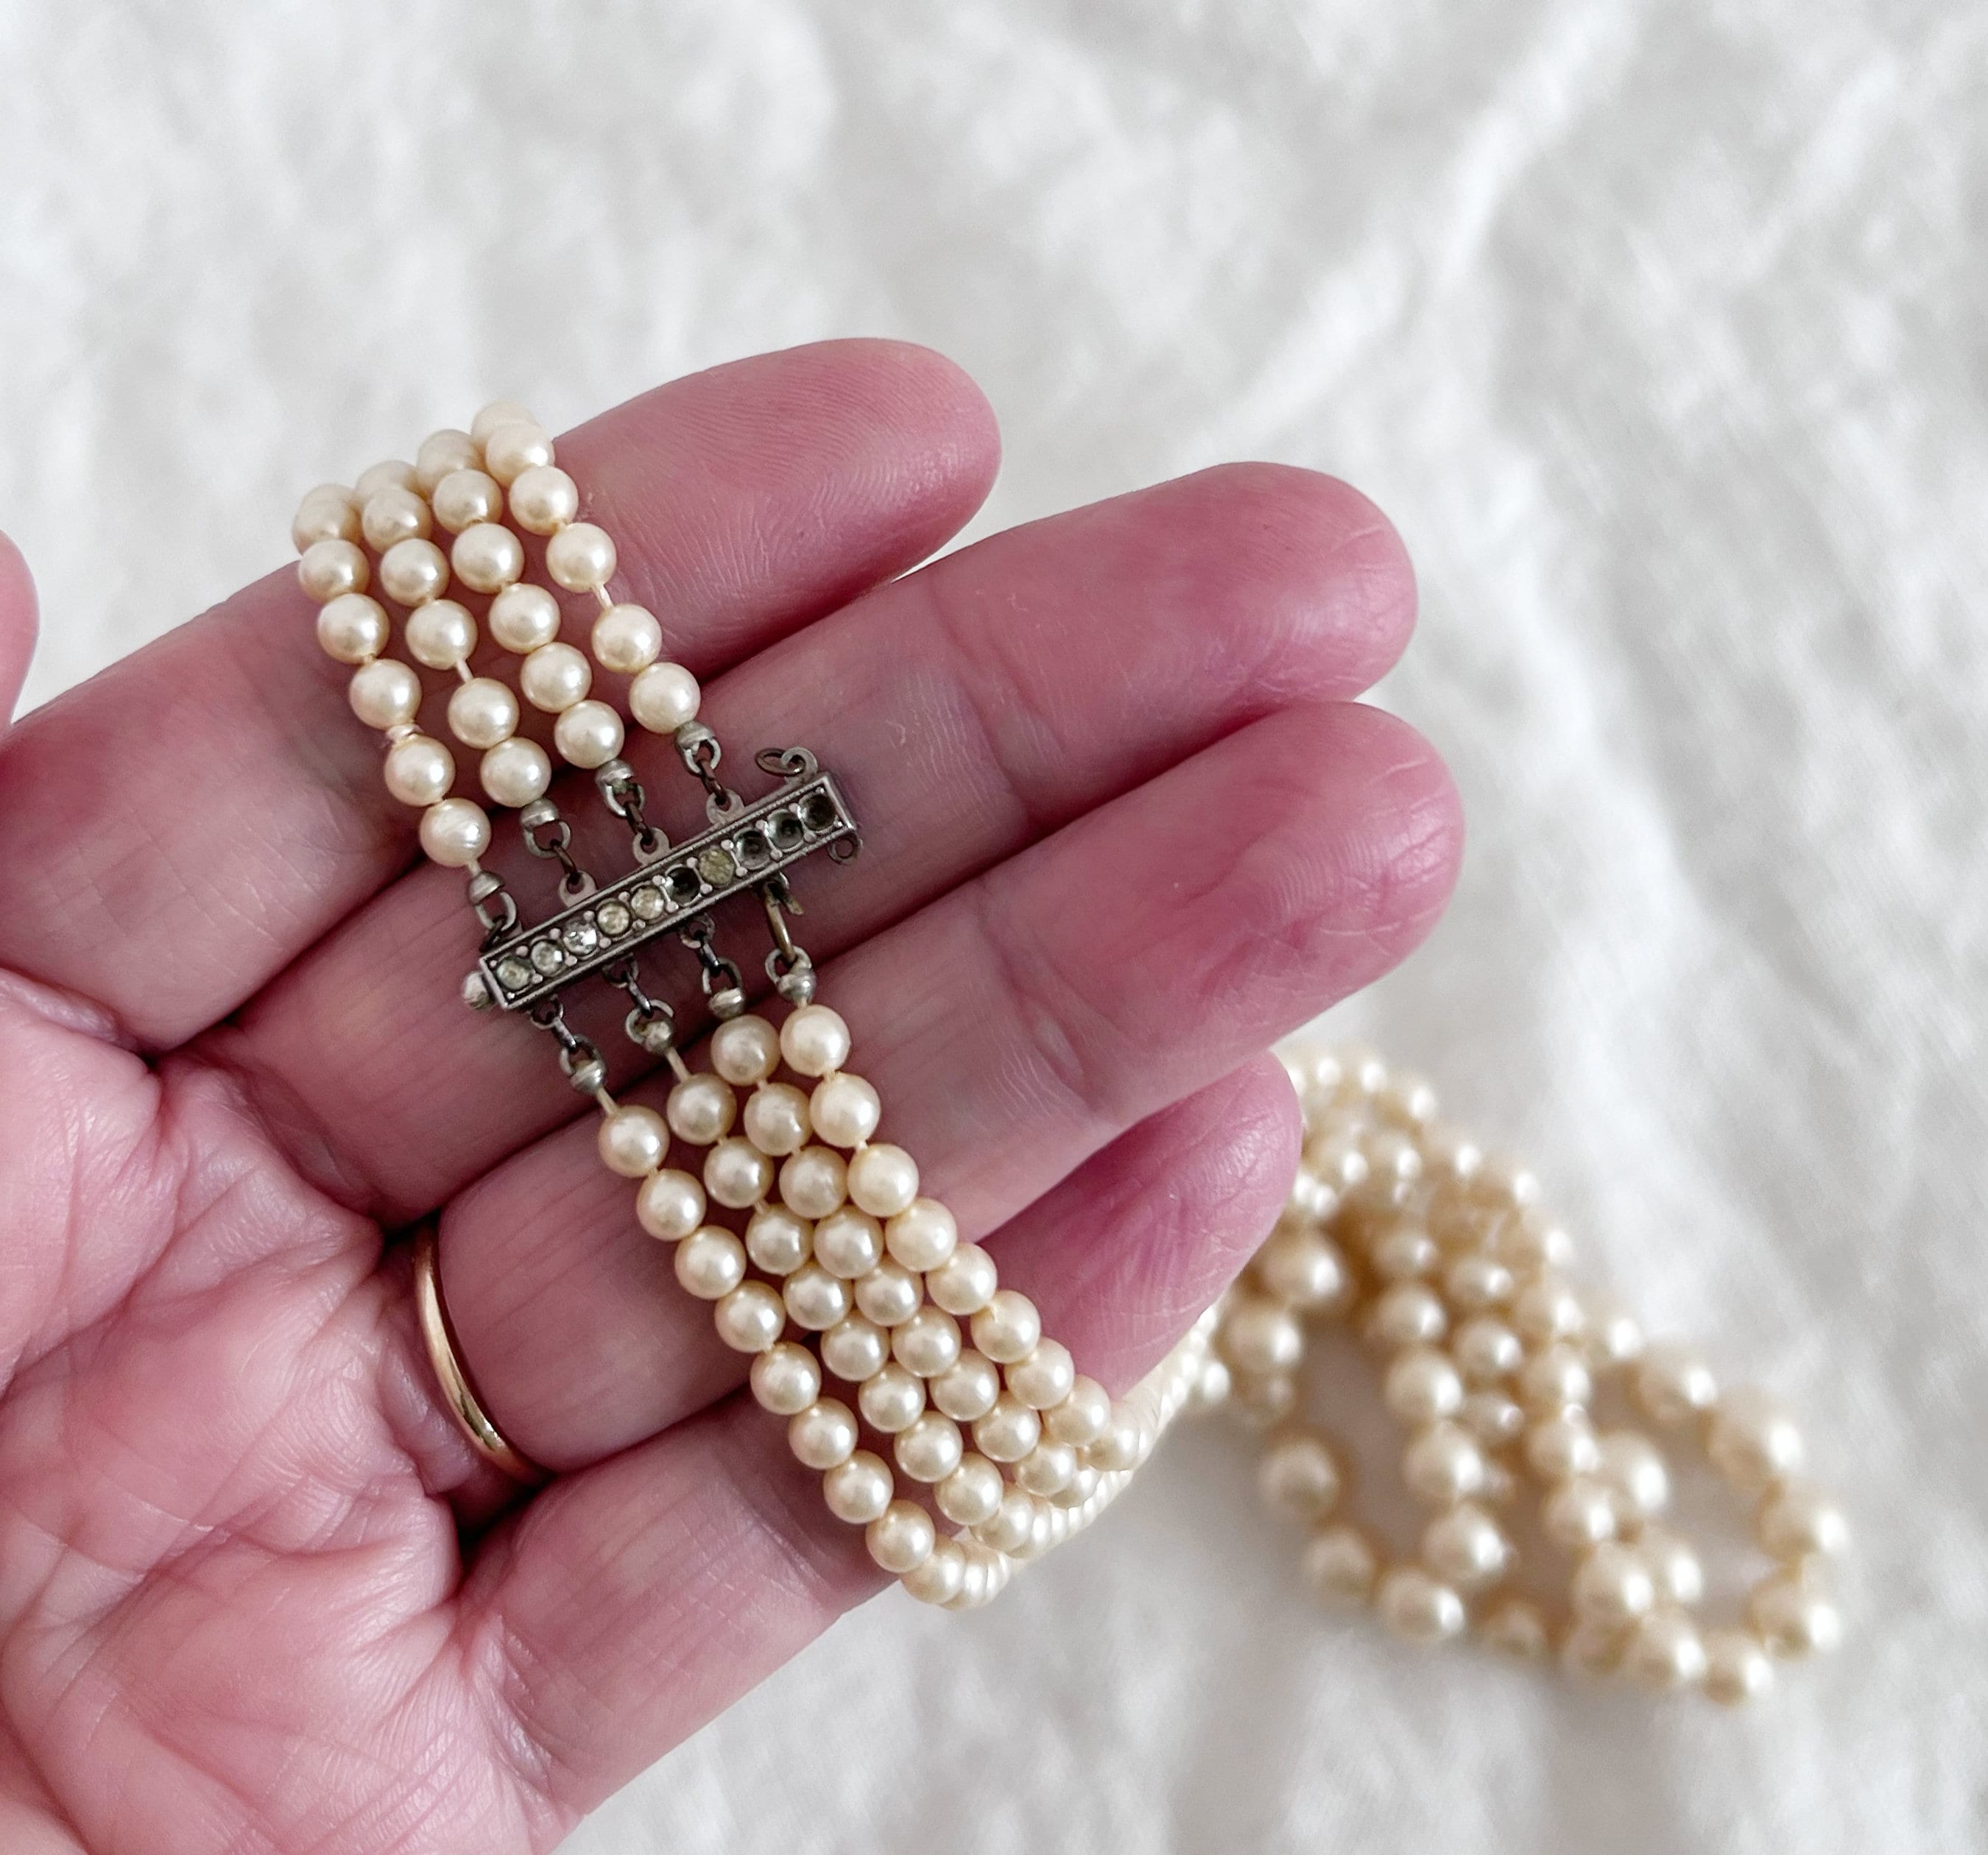 4 Strand Freshwater Rice Pearl Necklace 14K Never used | eBay